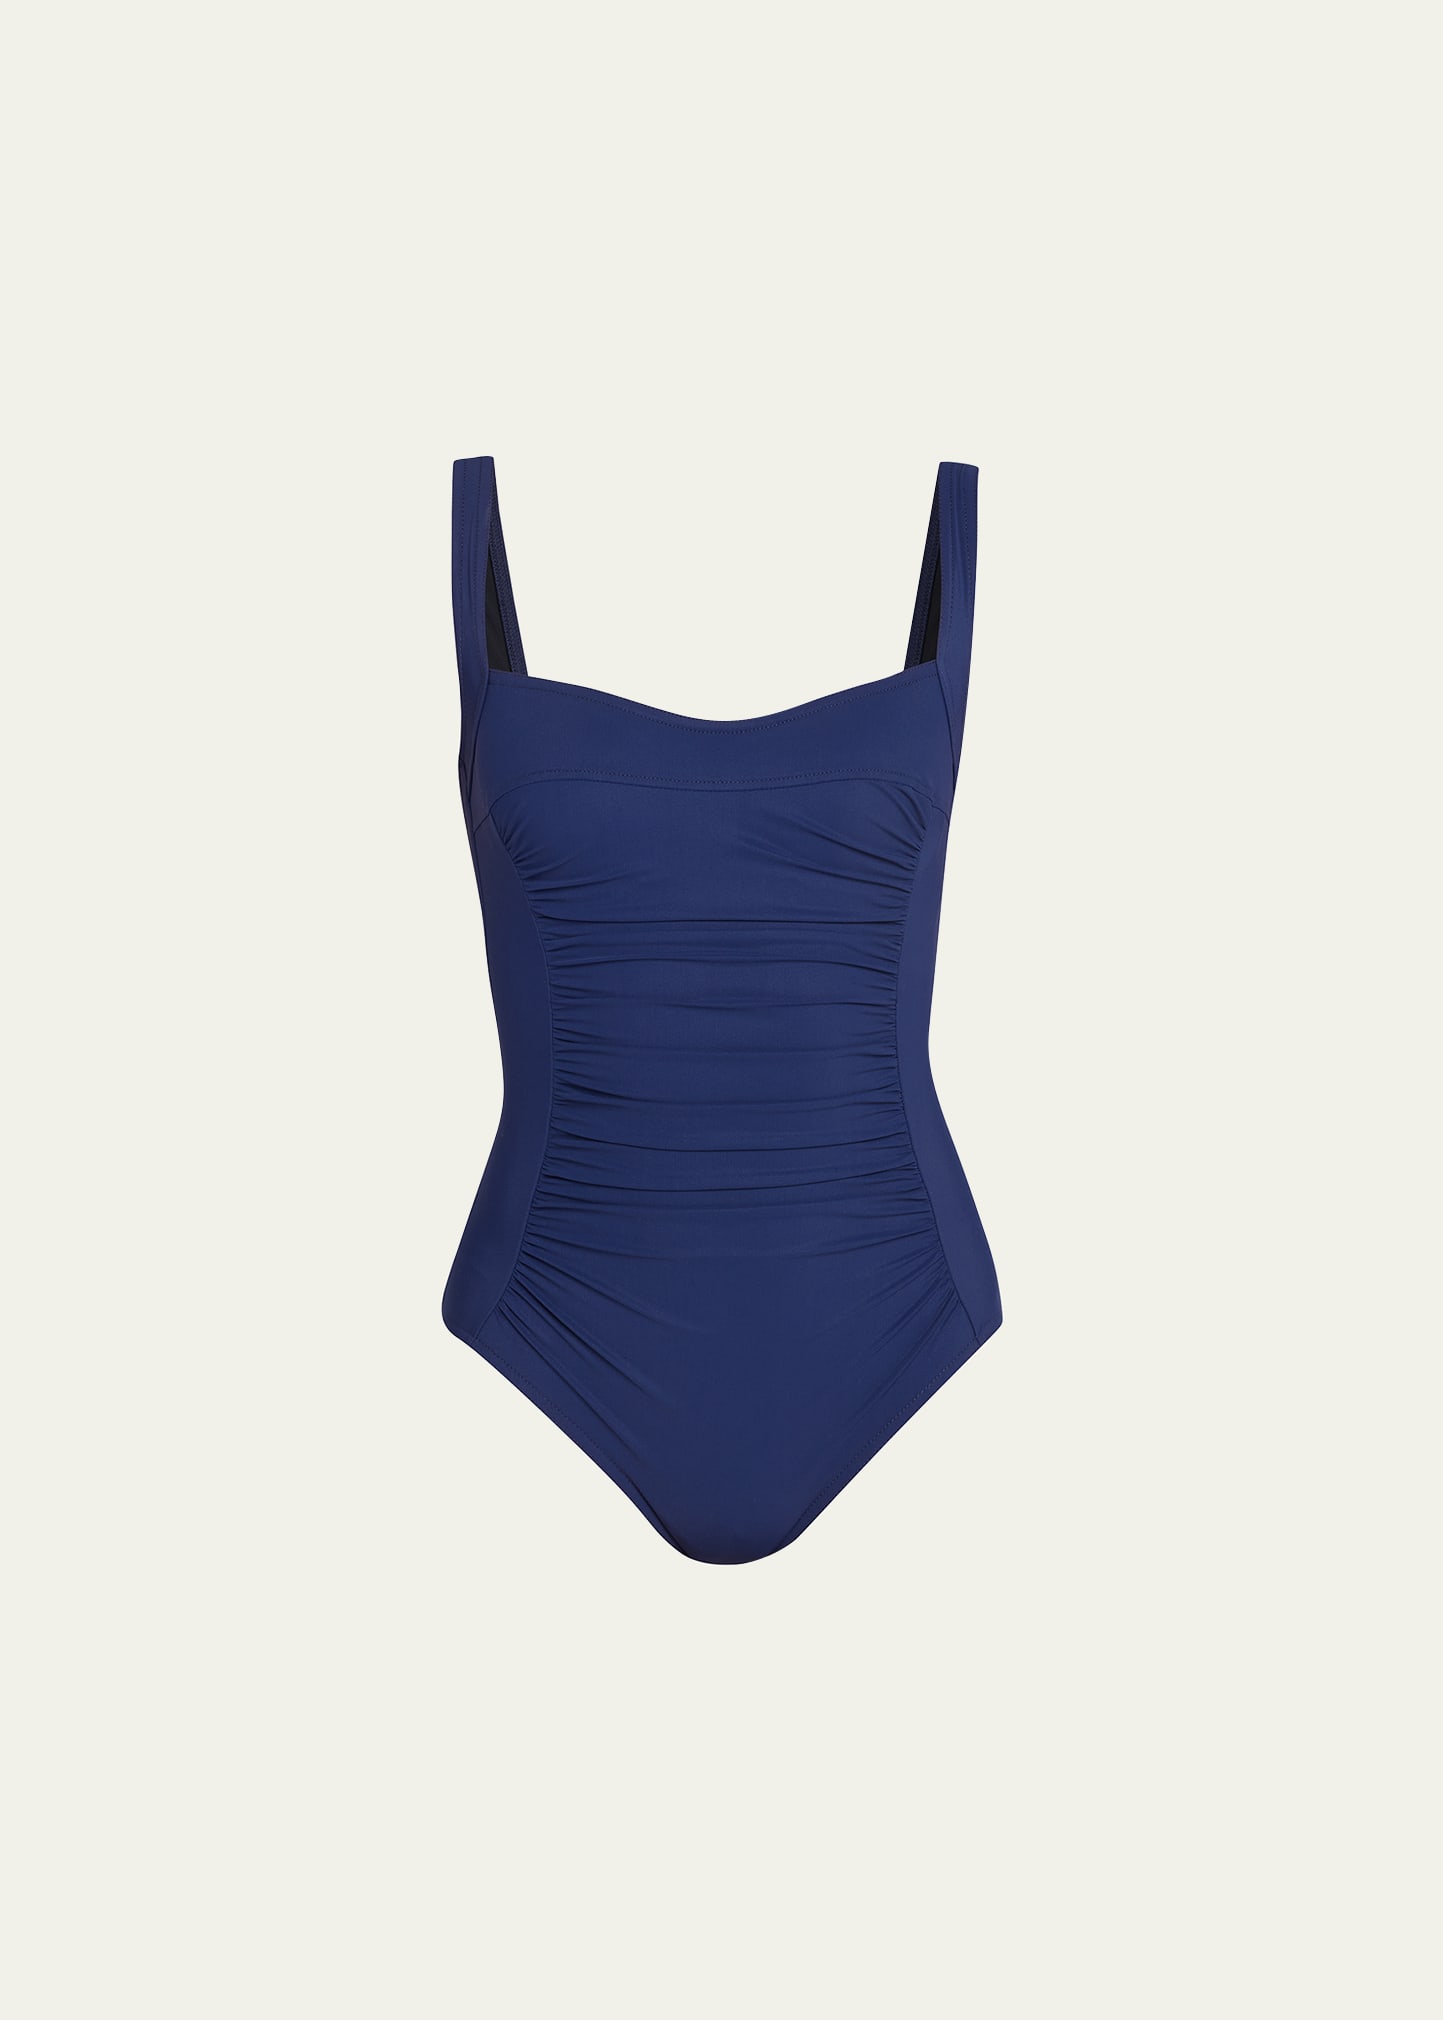 Karla Colletto One-piece Swimsuit In Navy